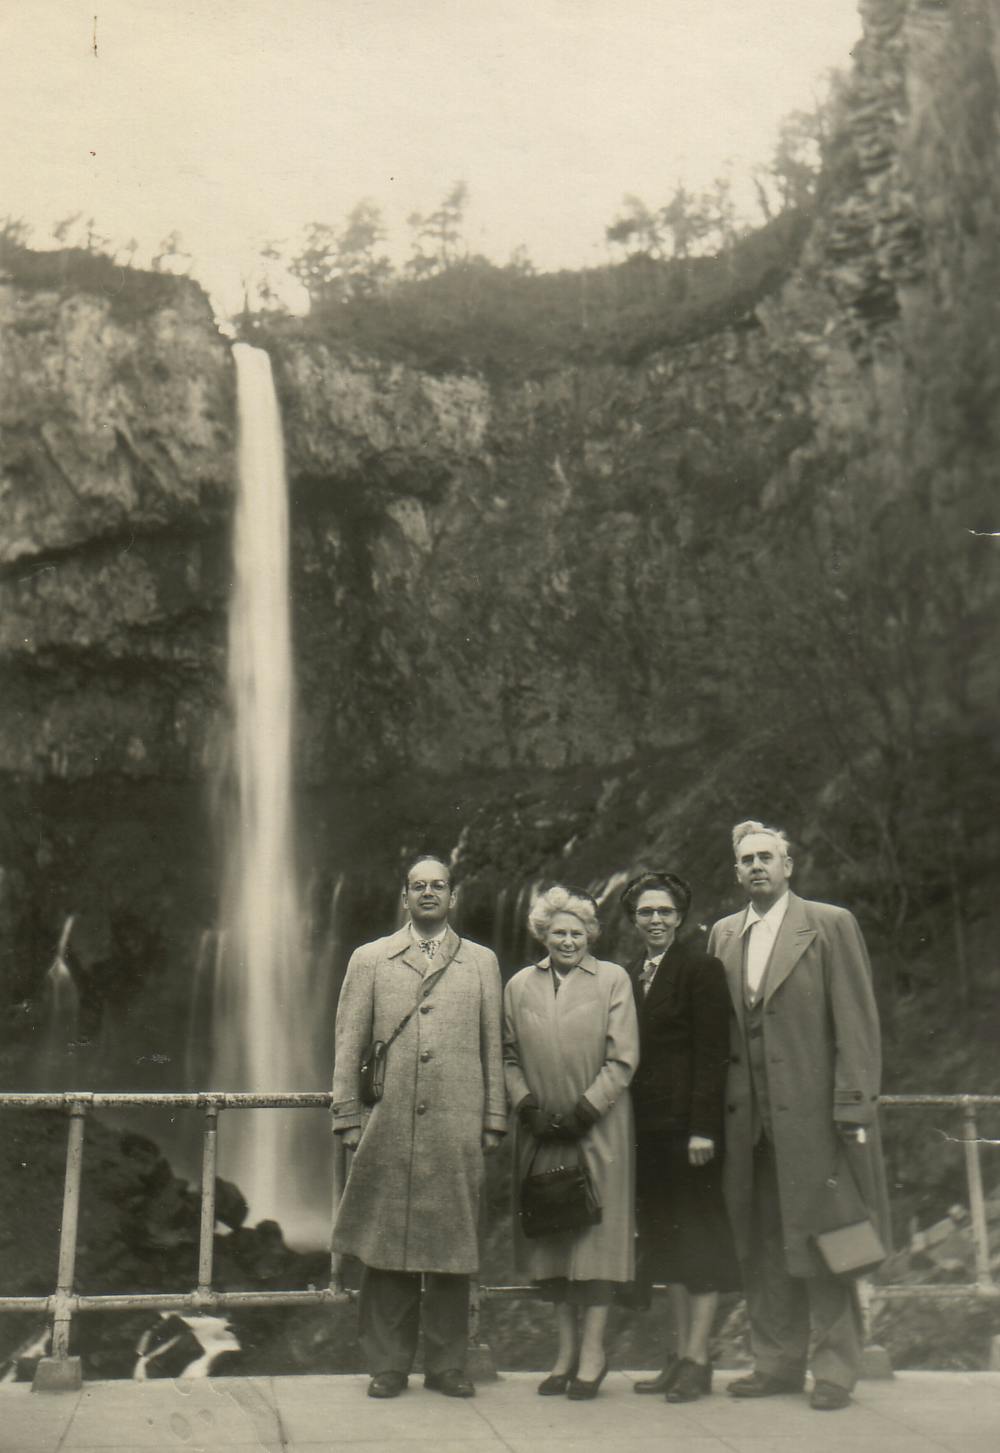 Stanley and three others standing in front of a waterfall